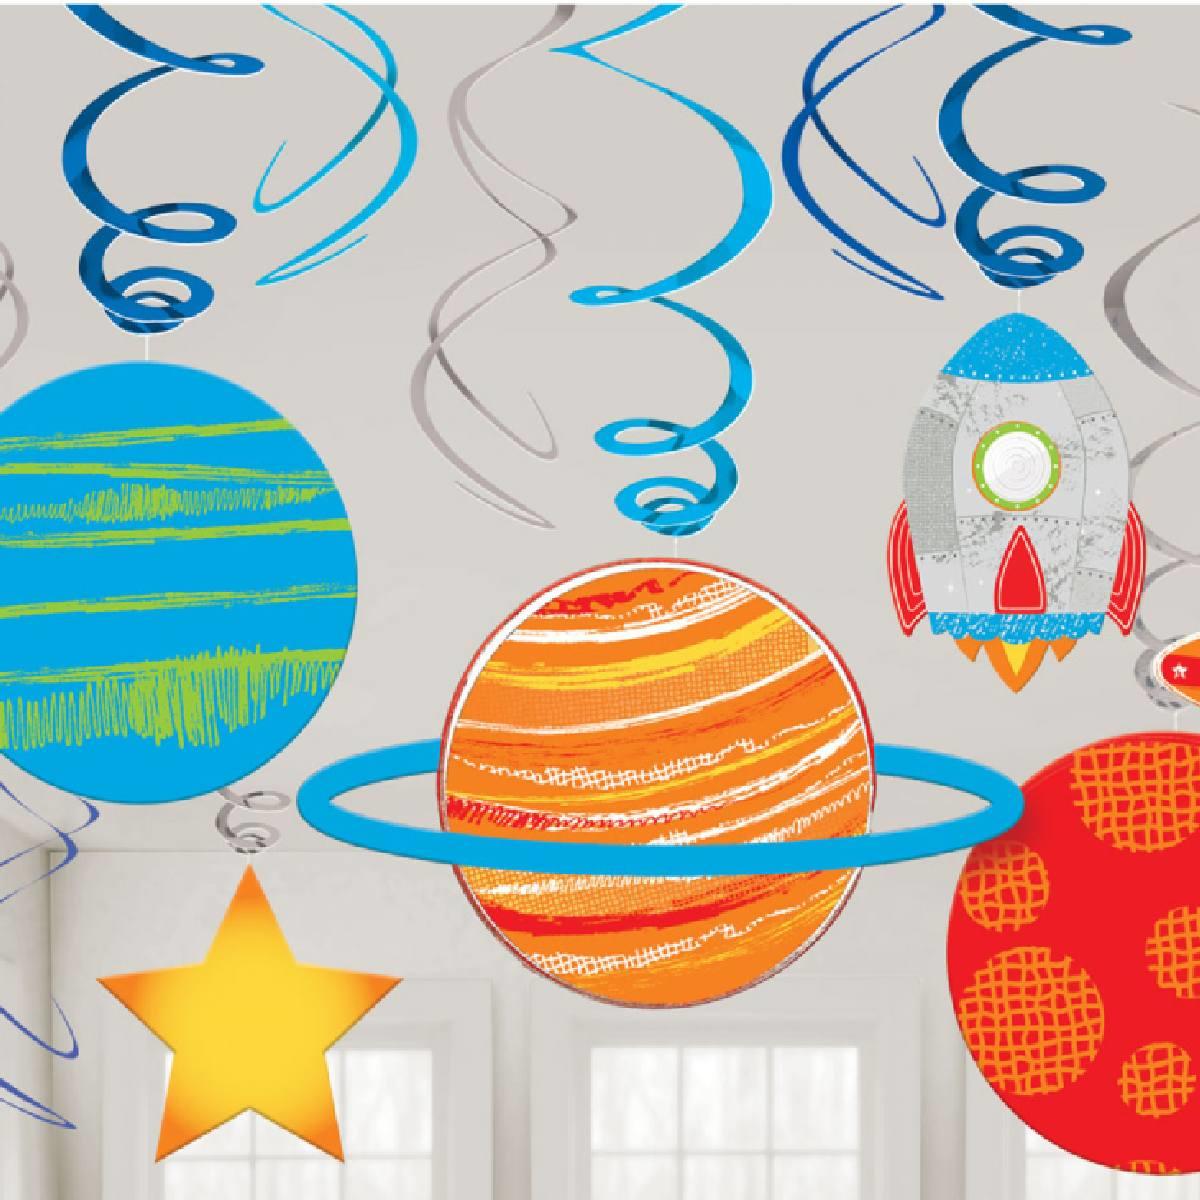 Blast Off Birthday Swirl Decorations pack 12 pcs by Amscan 672278 available here at Karnival Costumes online party shop